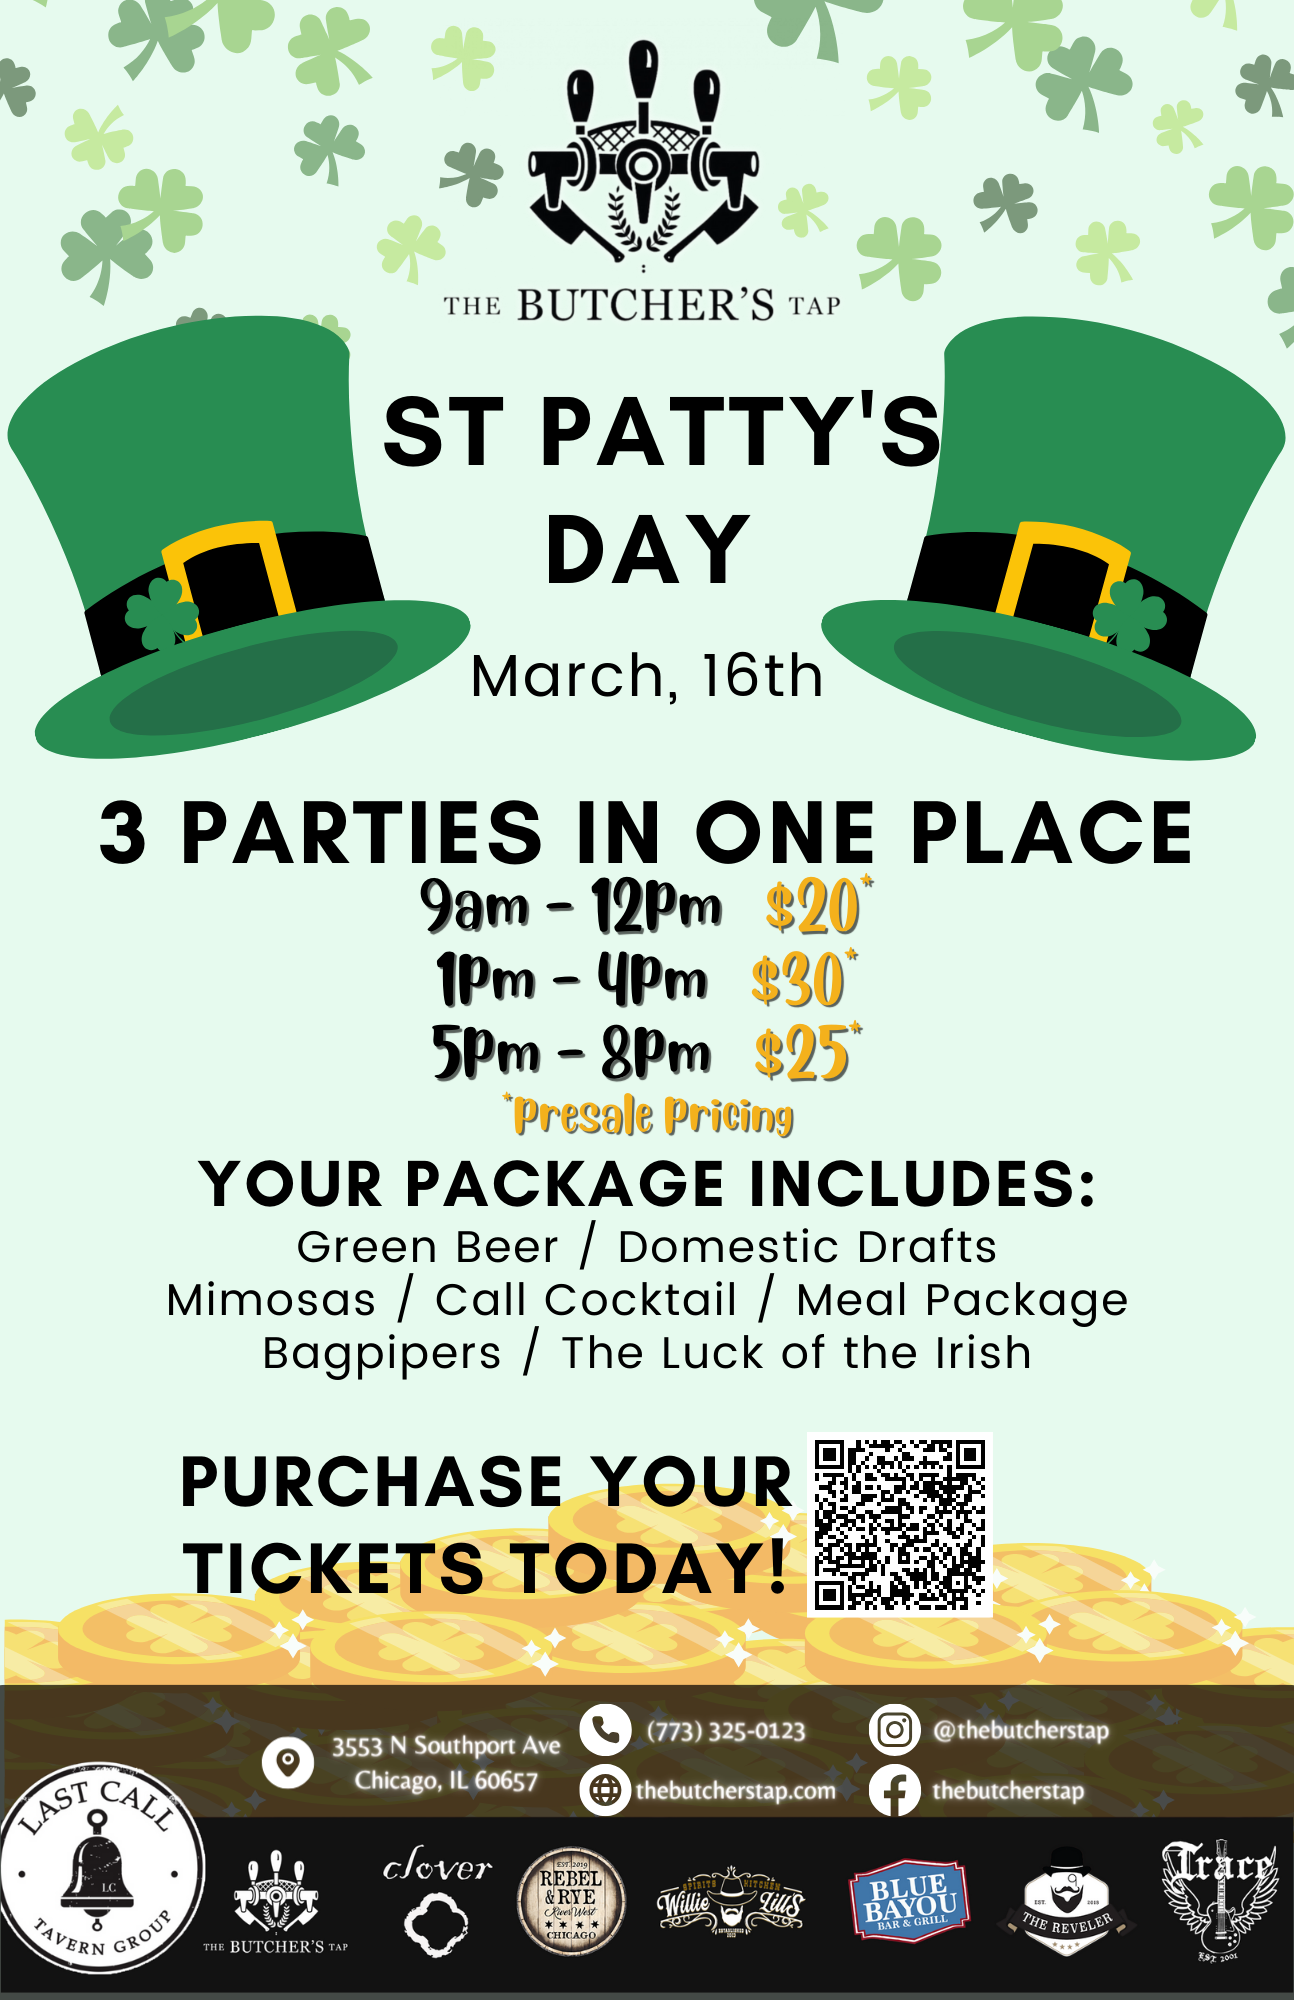 St. Patty's Day - The Butcher's